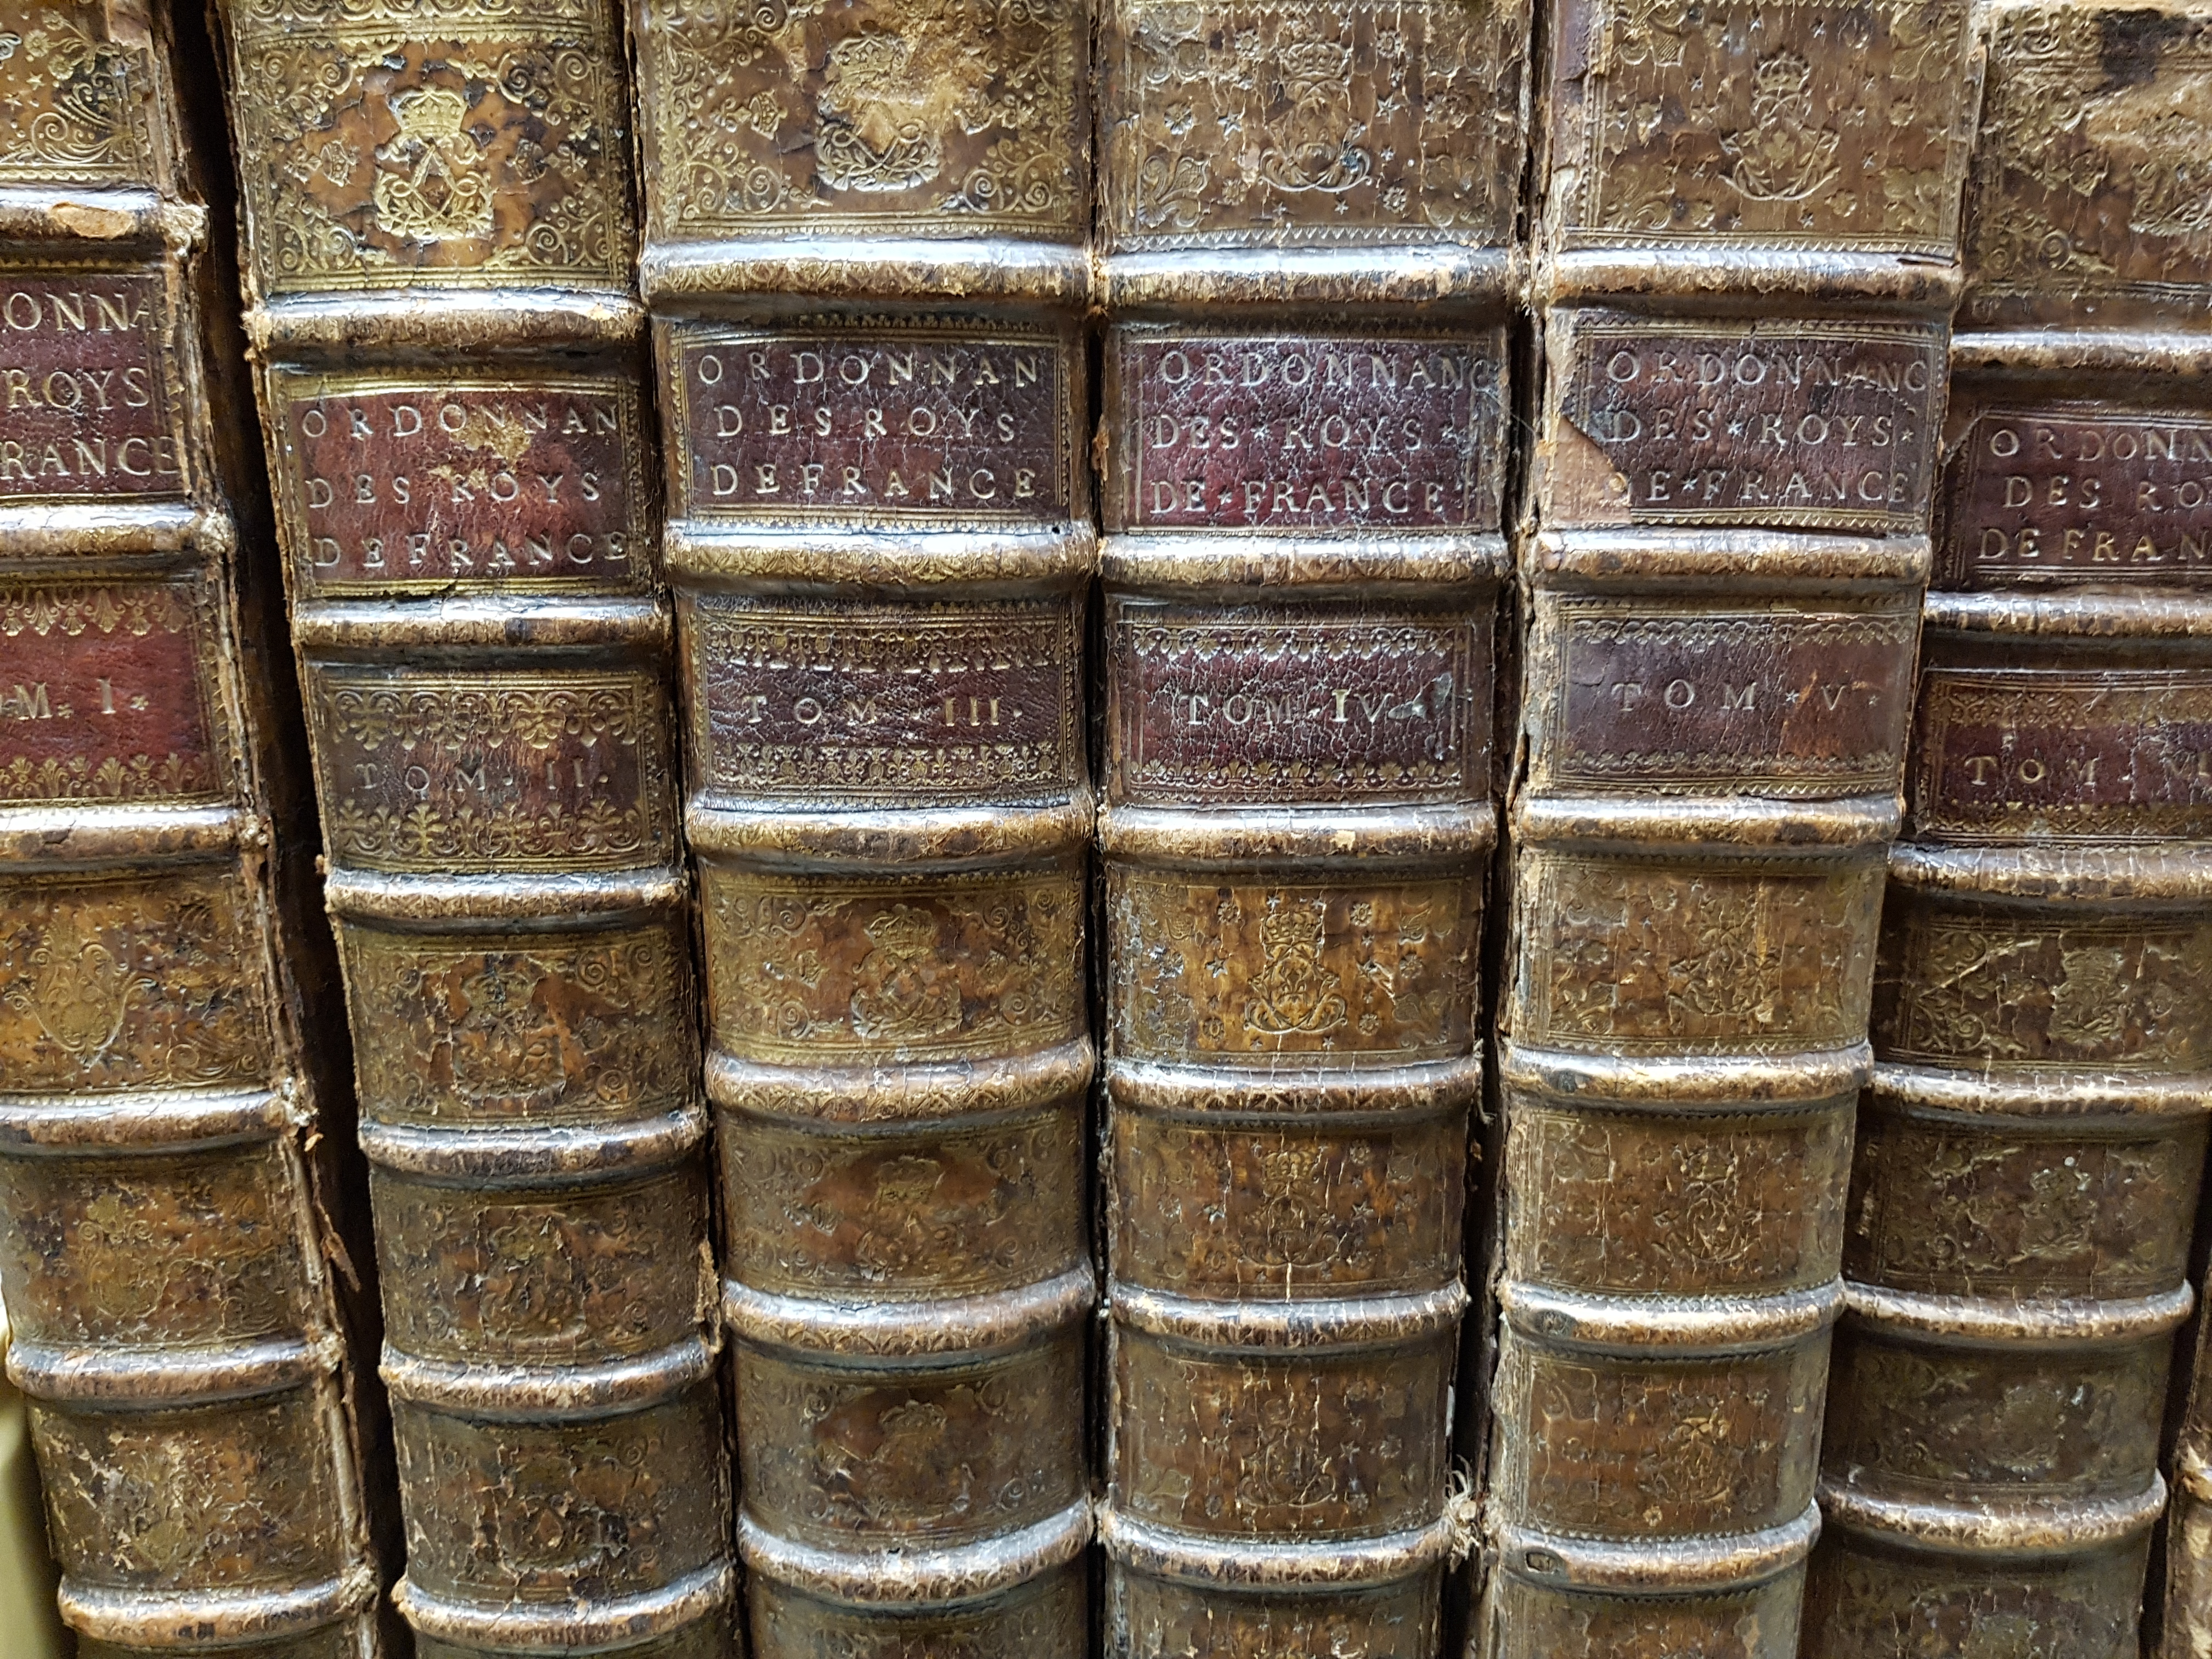 Photograph of the spines of 6 antique, leather-bound books lined up on  a shelf. 